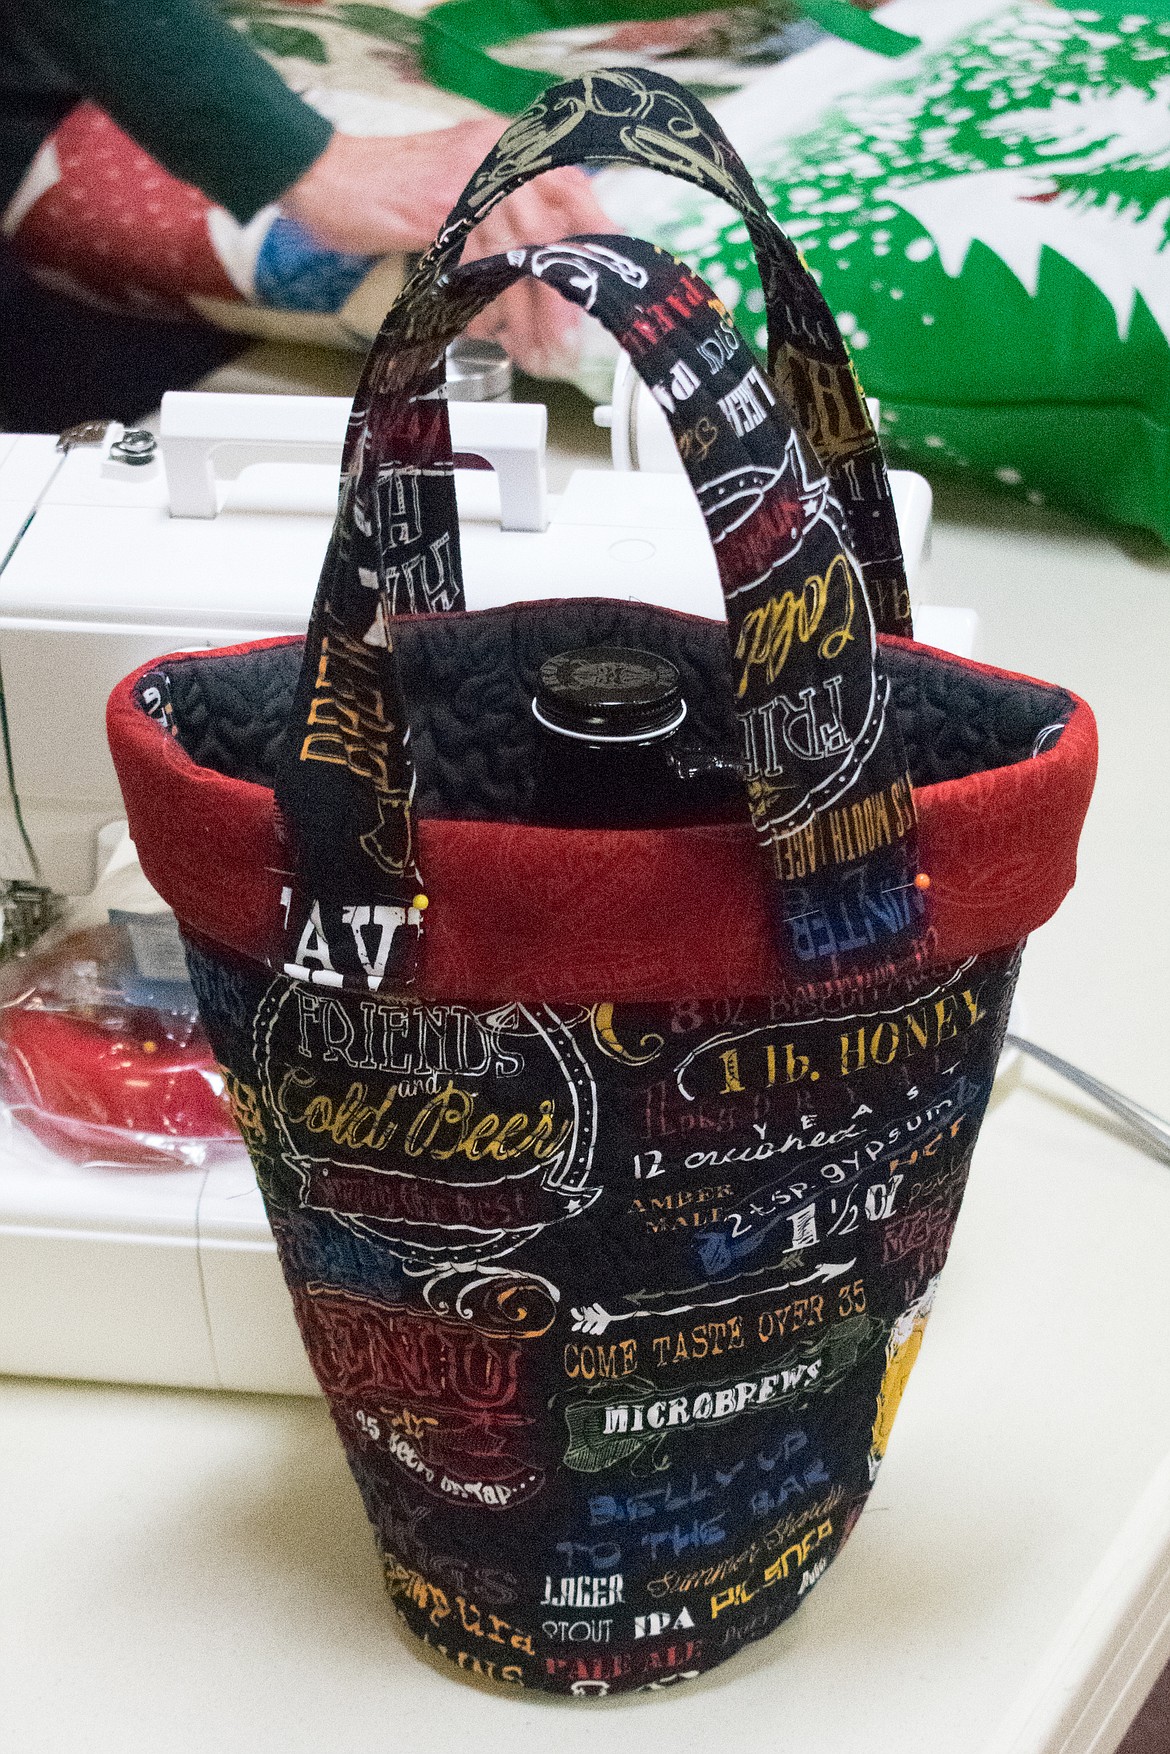 One of the quilted baskets for carrying a beer growler made by Sharon Gehrke. The foam batting helps to insulate. (Ben Kibbey/The Western News)